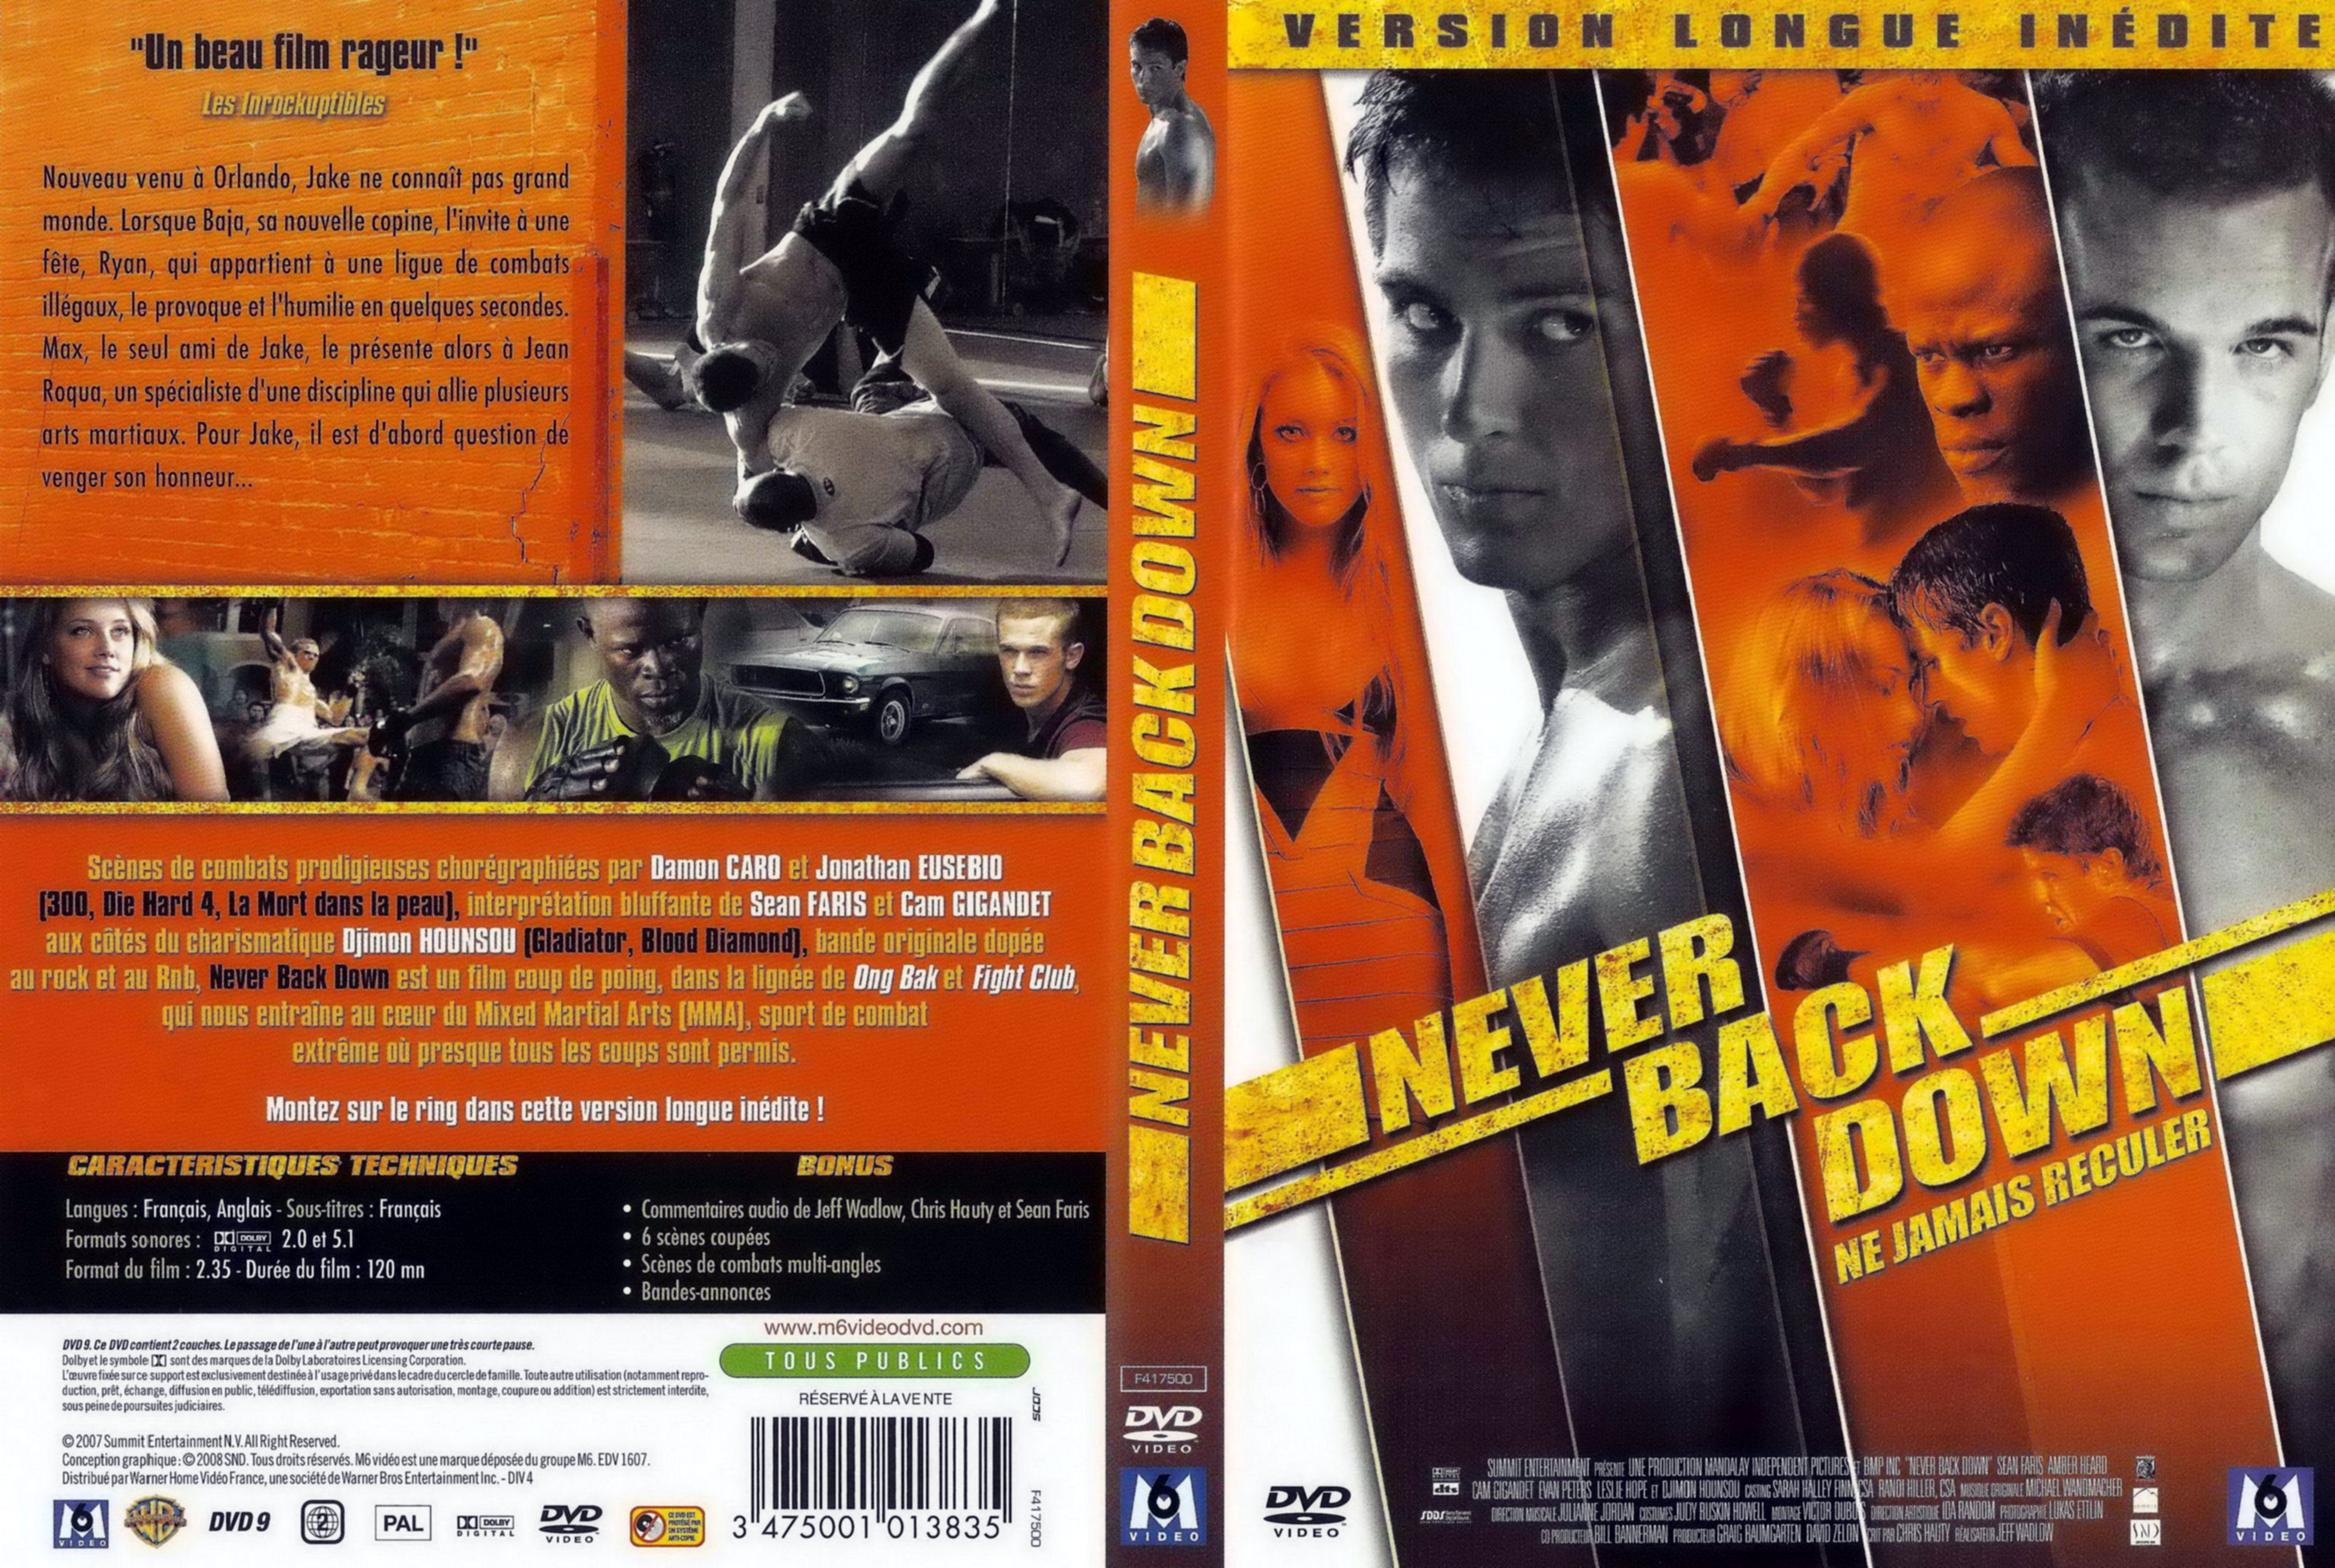 Jaquette DVD Never back down